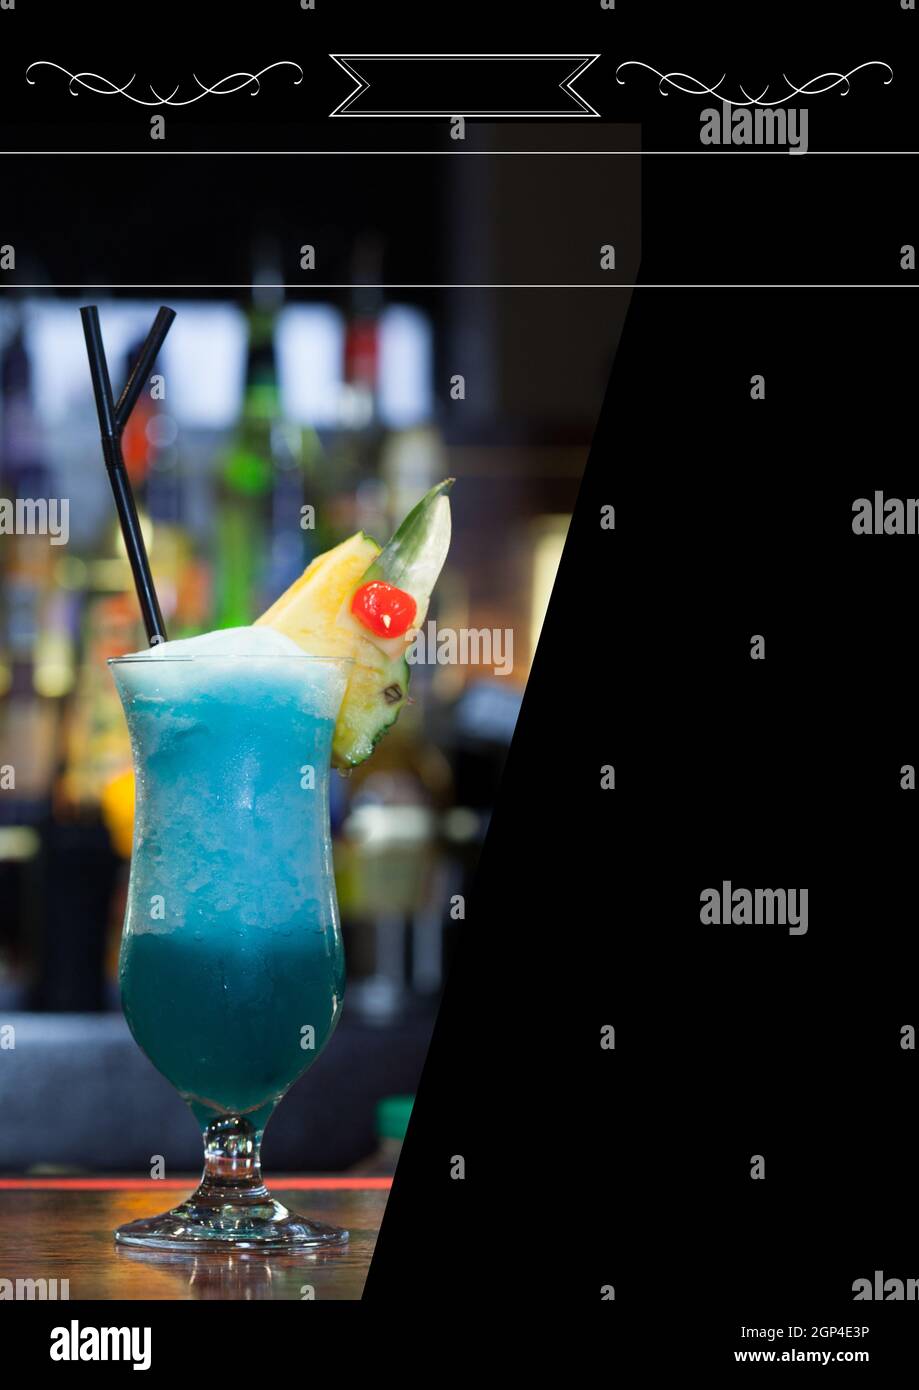 Composition of white frame over blue drink in bar on black background Stock Photo